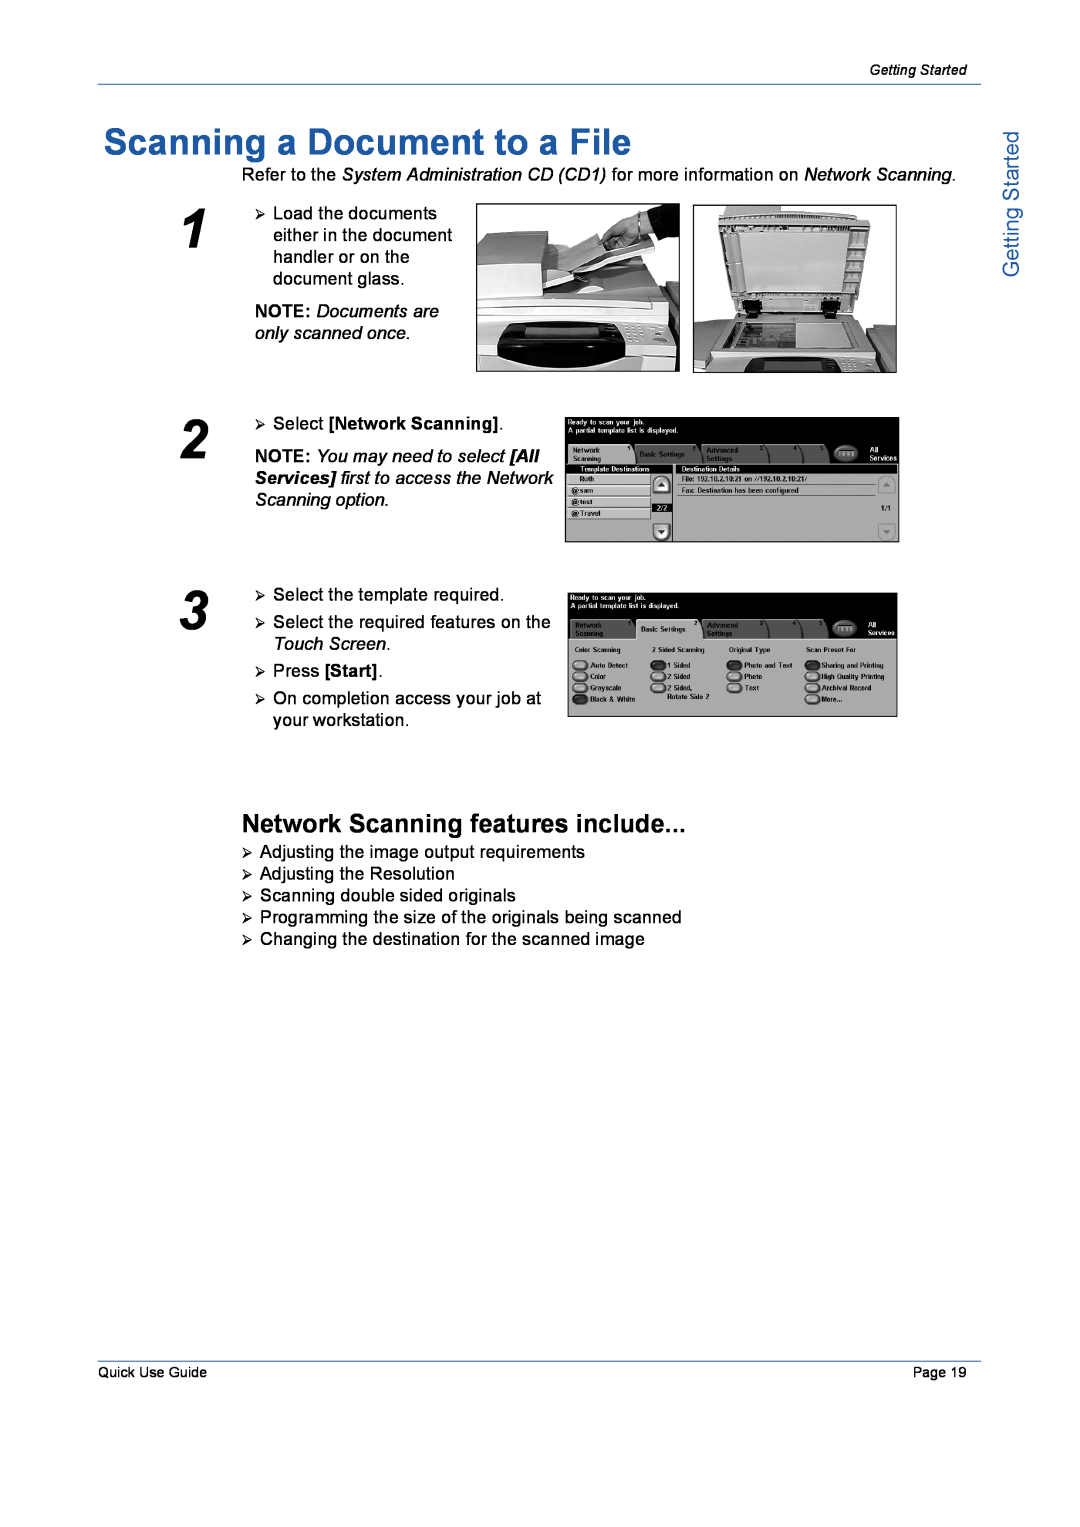 Xerox 5632 manual Scanning a Document to a File, Network Scanning features include, Getting Started 